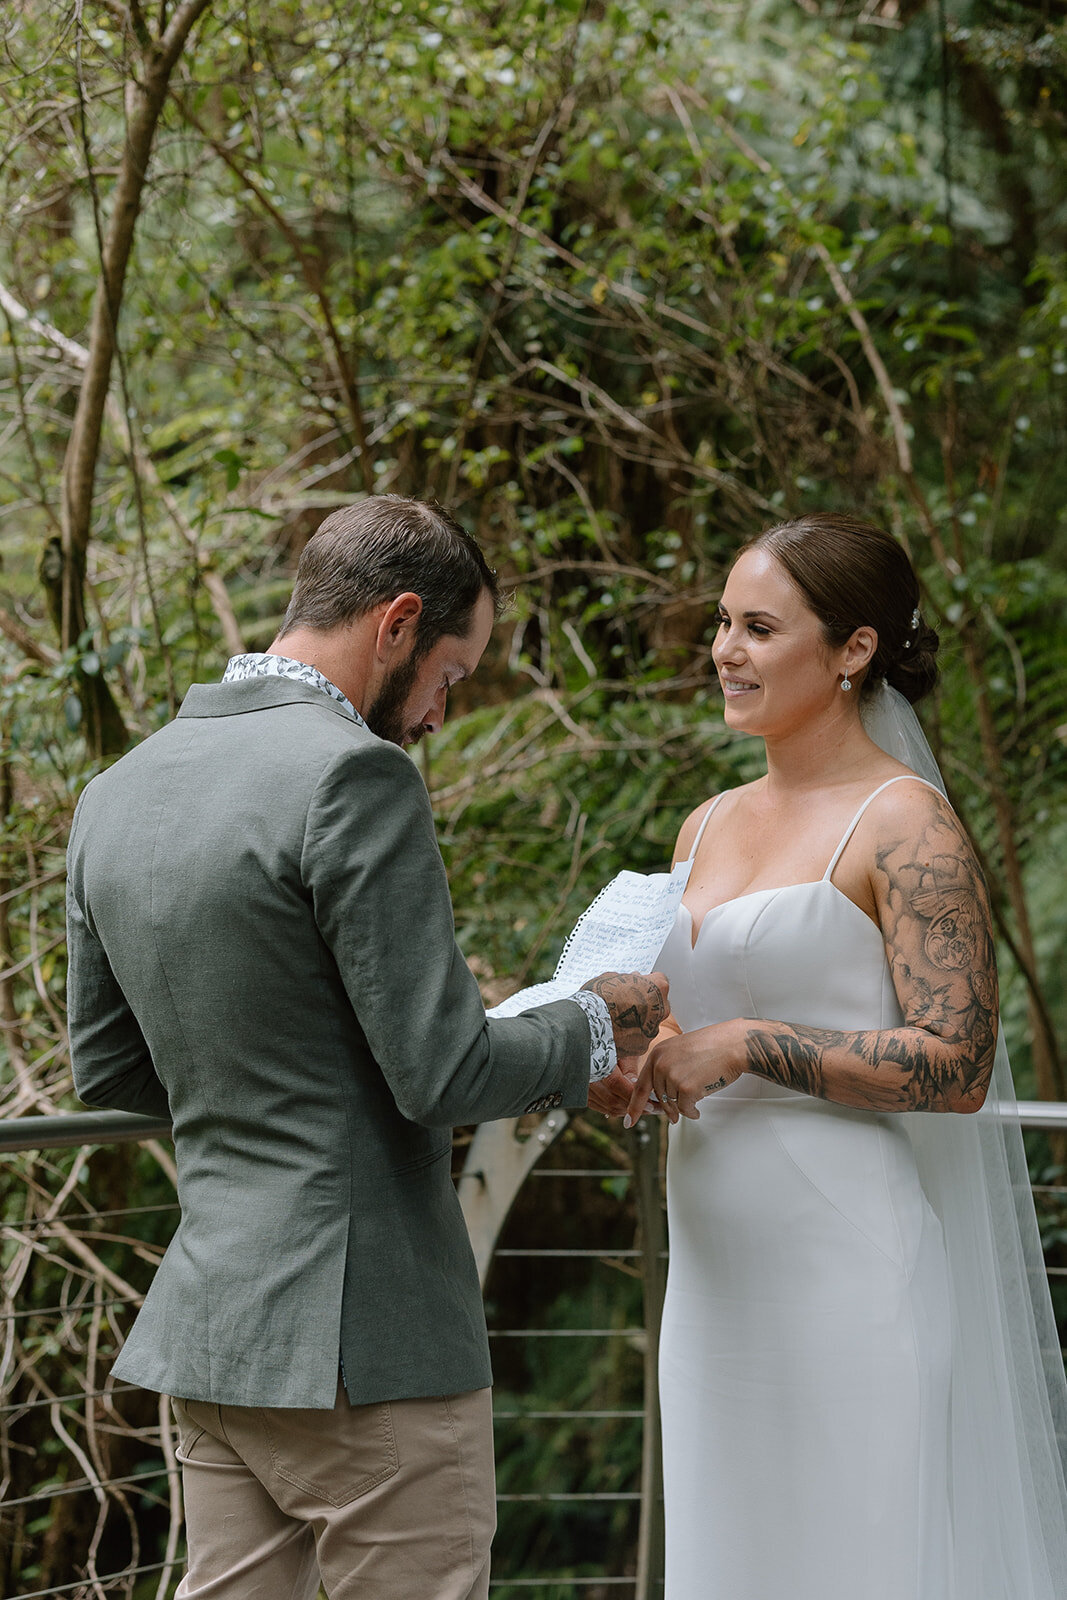 Stacey&Cory-Coast&Pines-118